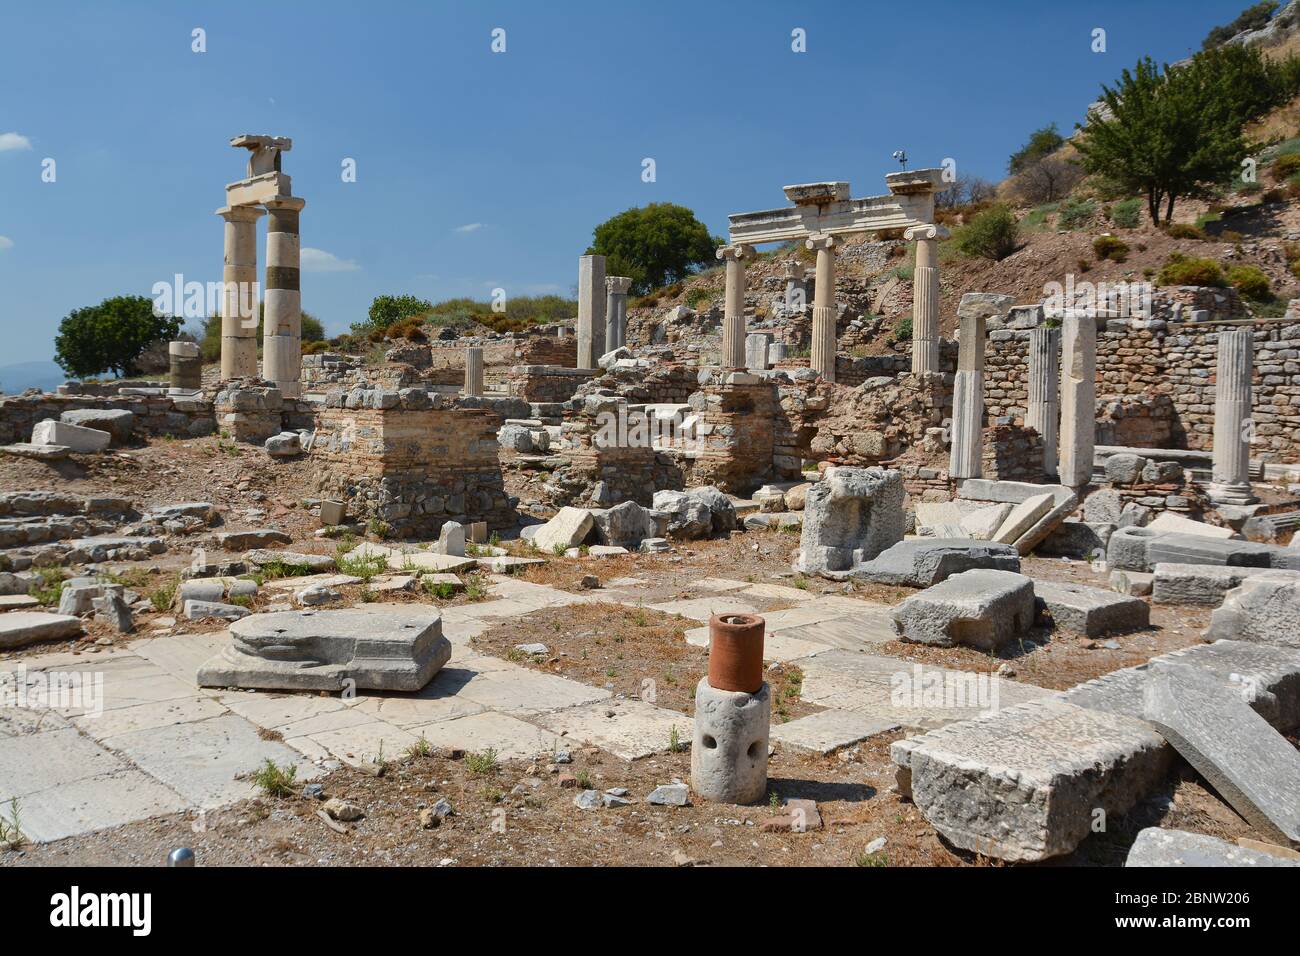 The ruins of the ancient city of Ephesus in Turkey. Prytaneion. Stock Photo